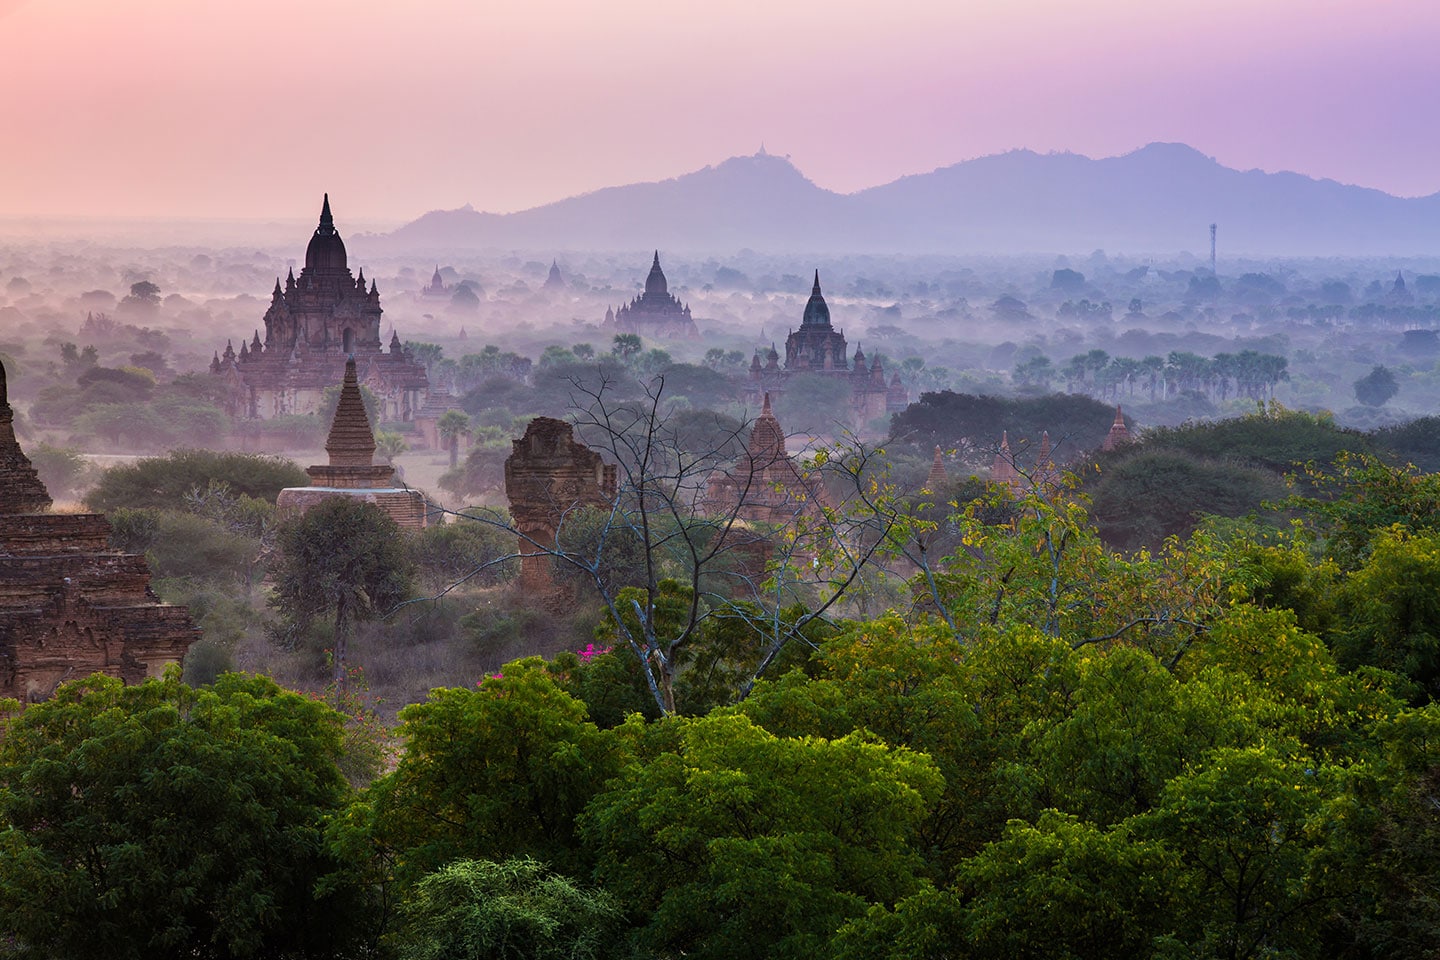 Sunrise over the temples of Bagan in Myanmar